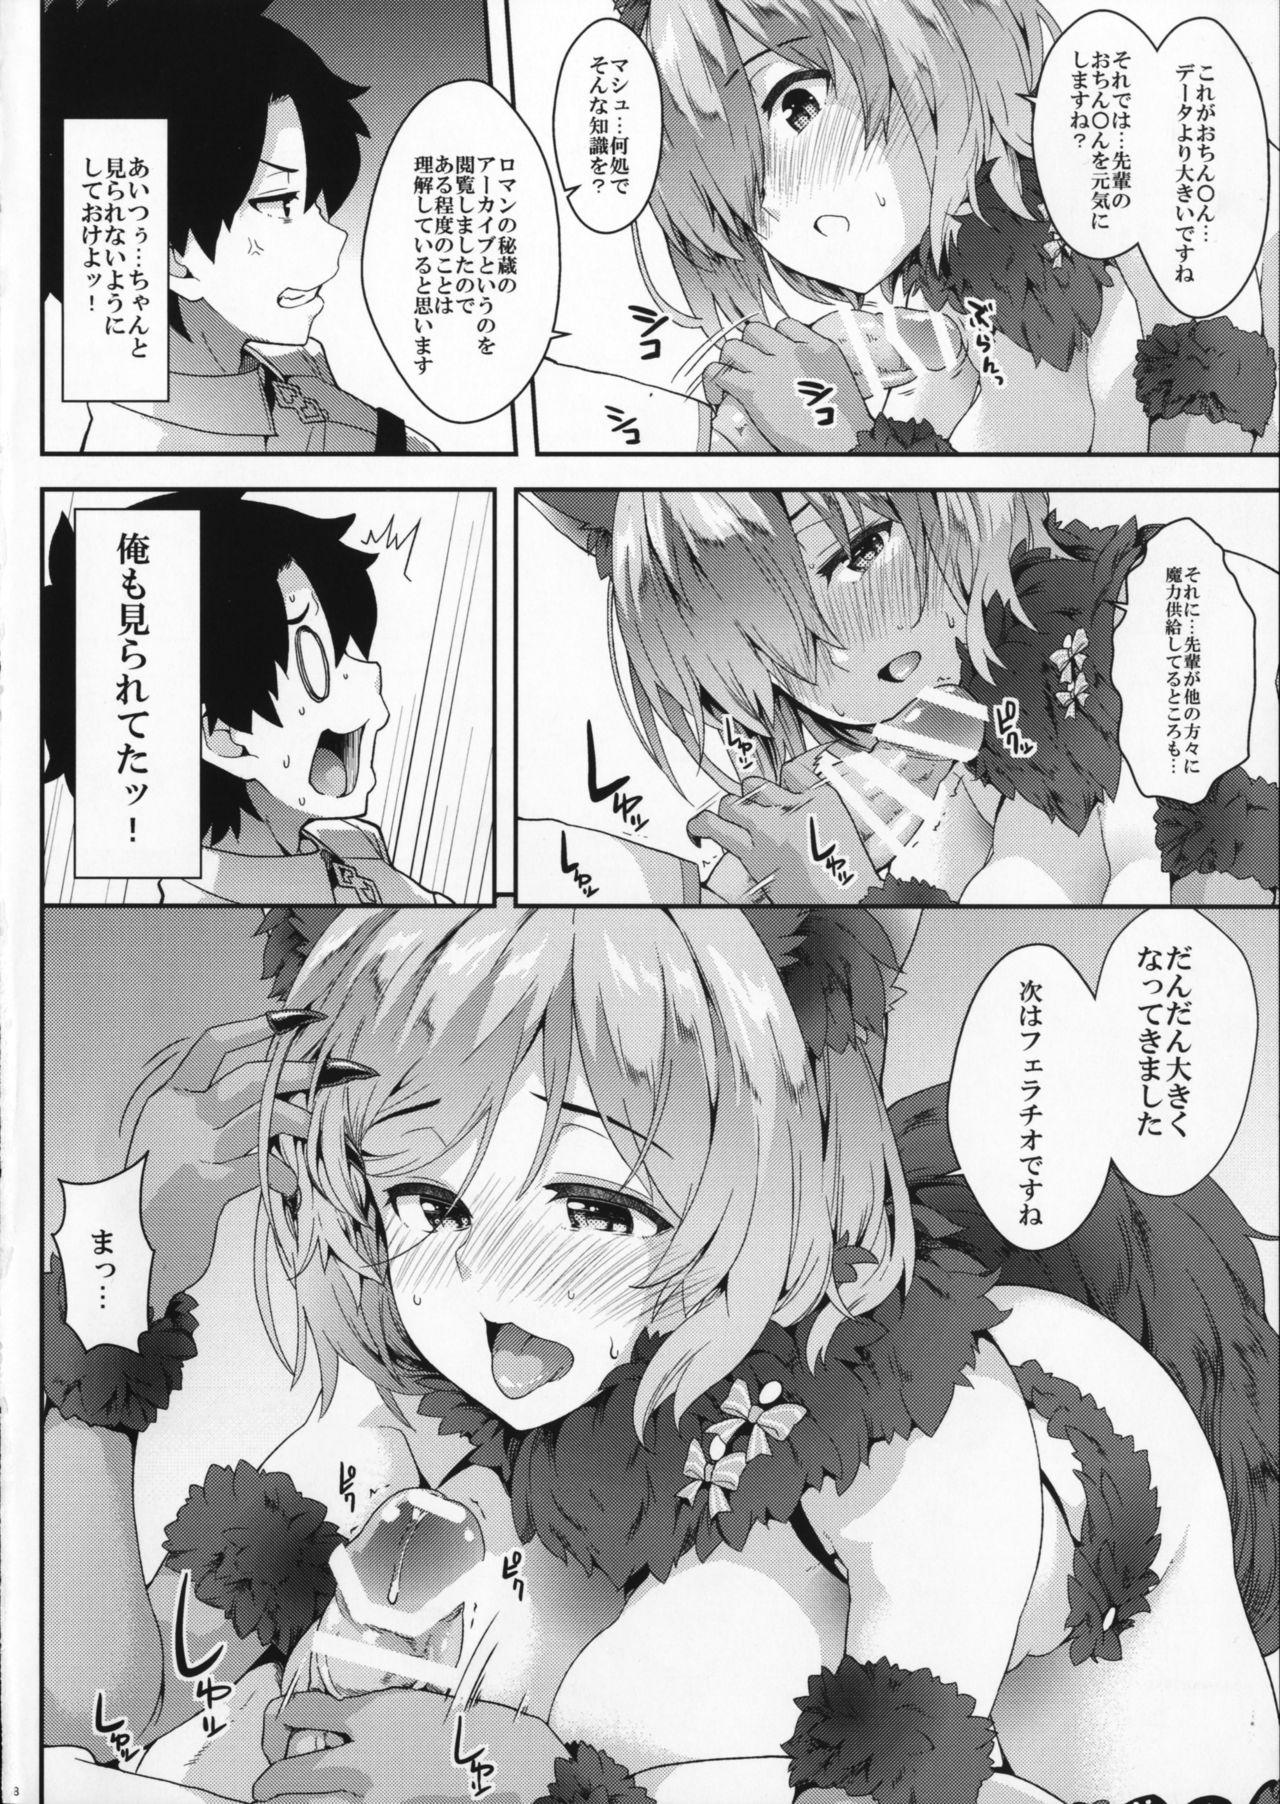 Vergon Why am I jealous of you? - Fate grand order Spit - Page 7